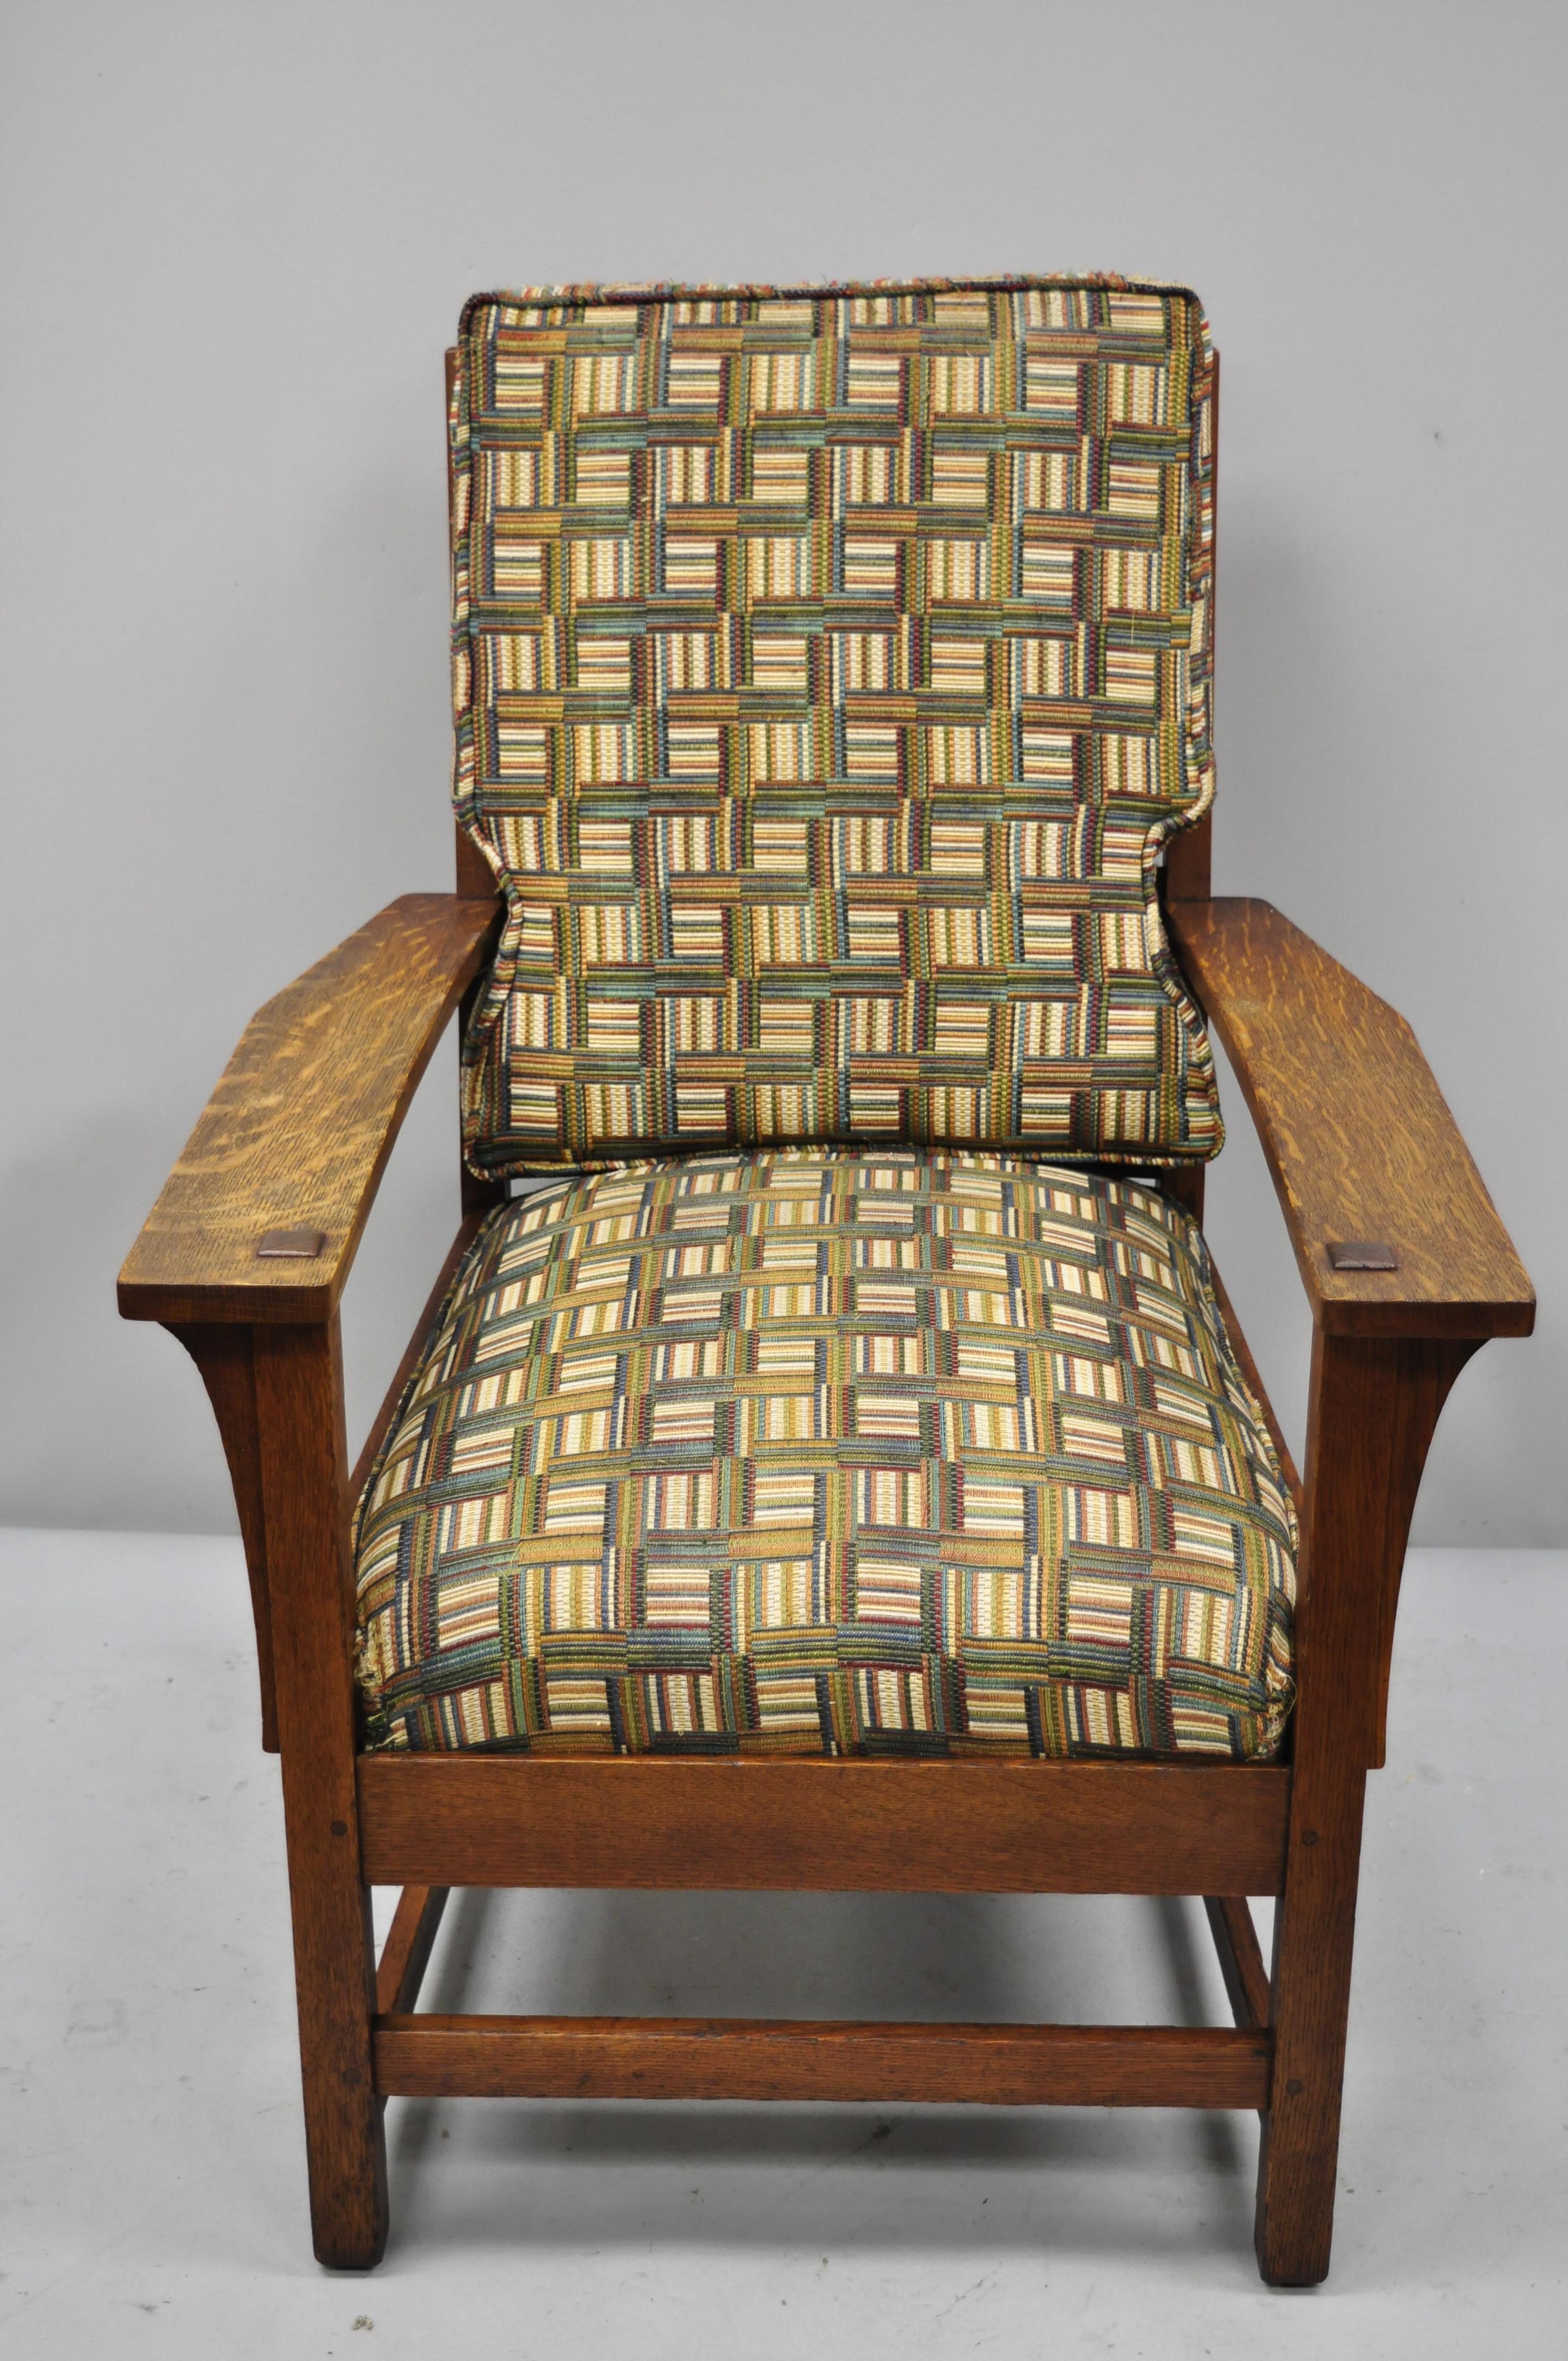 L & JG Stickley Mission oak Arts & Crafts armchair spring seat cushion. Item features drop spring seat cushion, ladder back, solid wood construction, beautiful wood grain, very nice antique item, quality American craftsmanship, circa early 1900s.